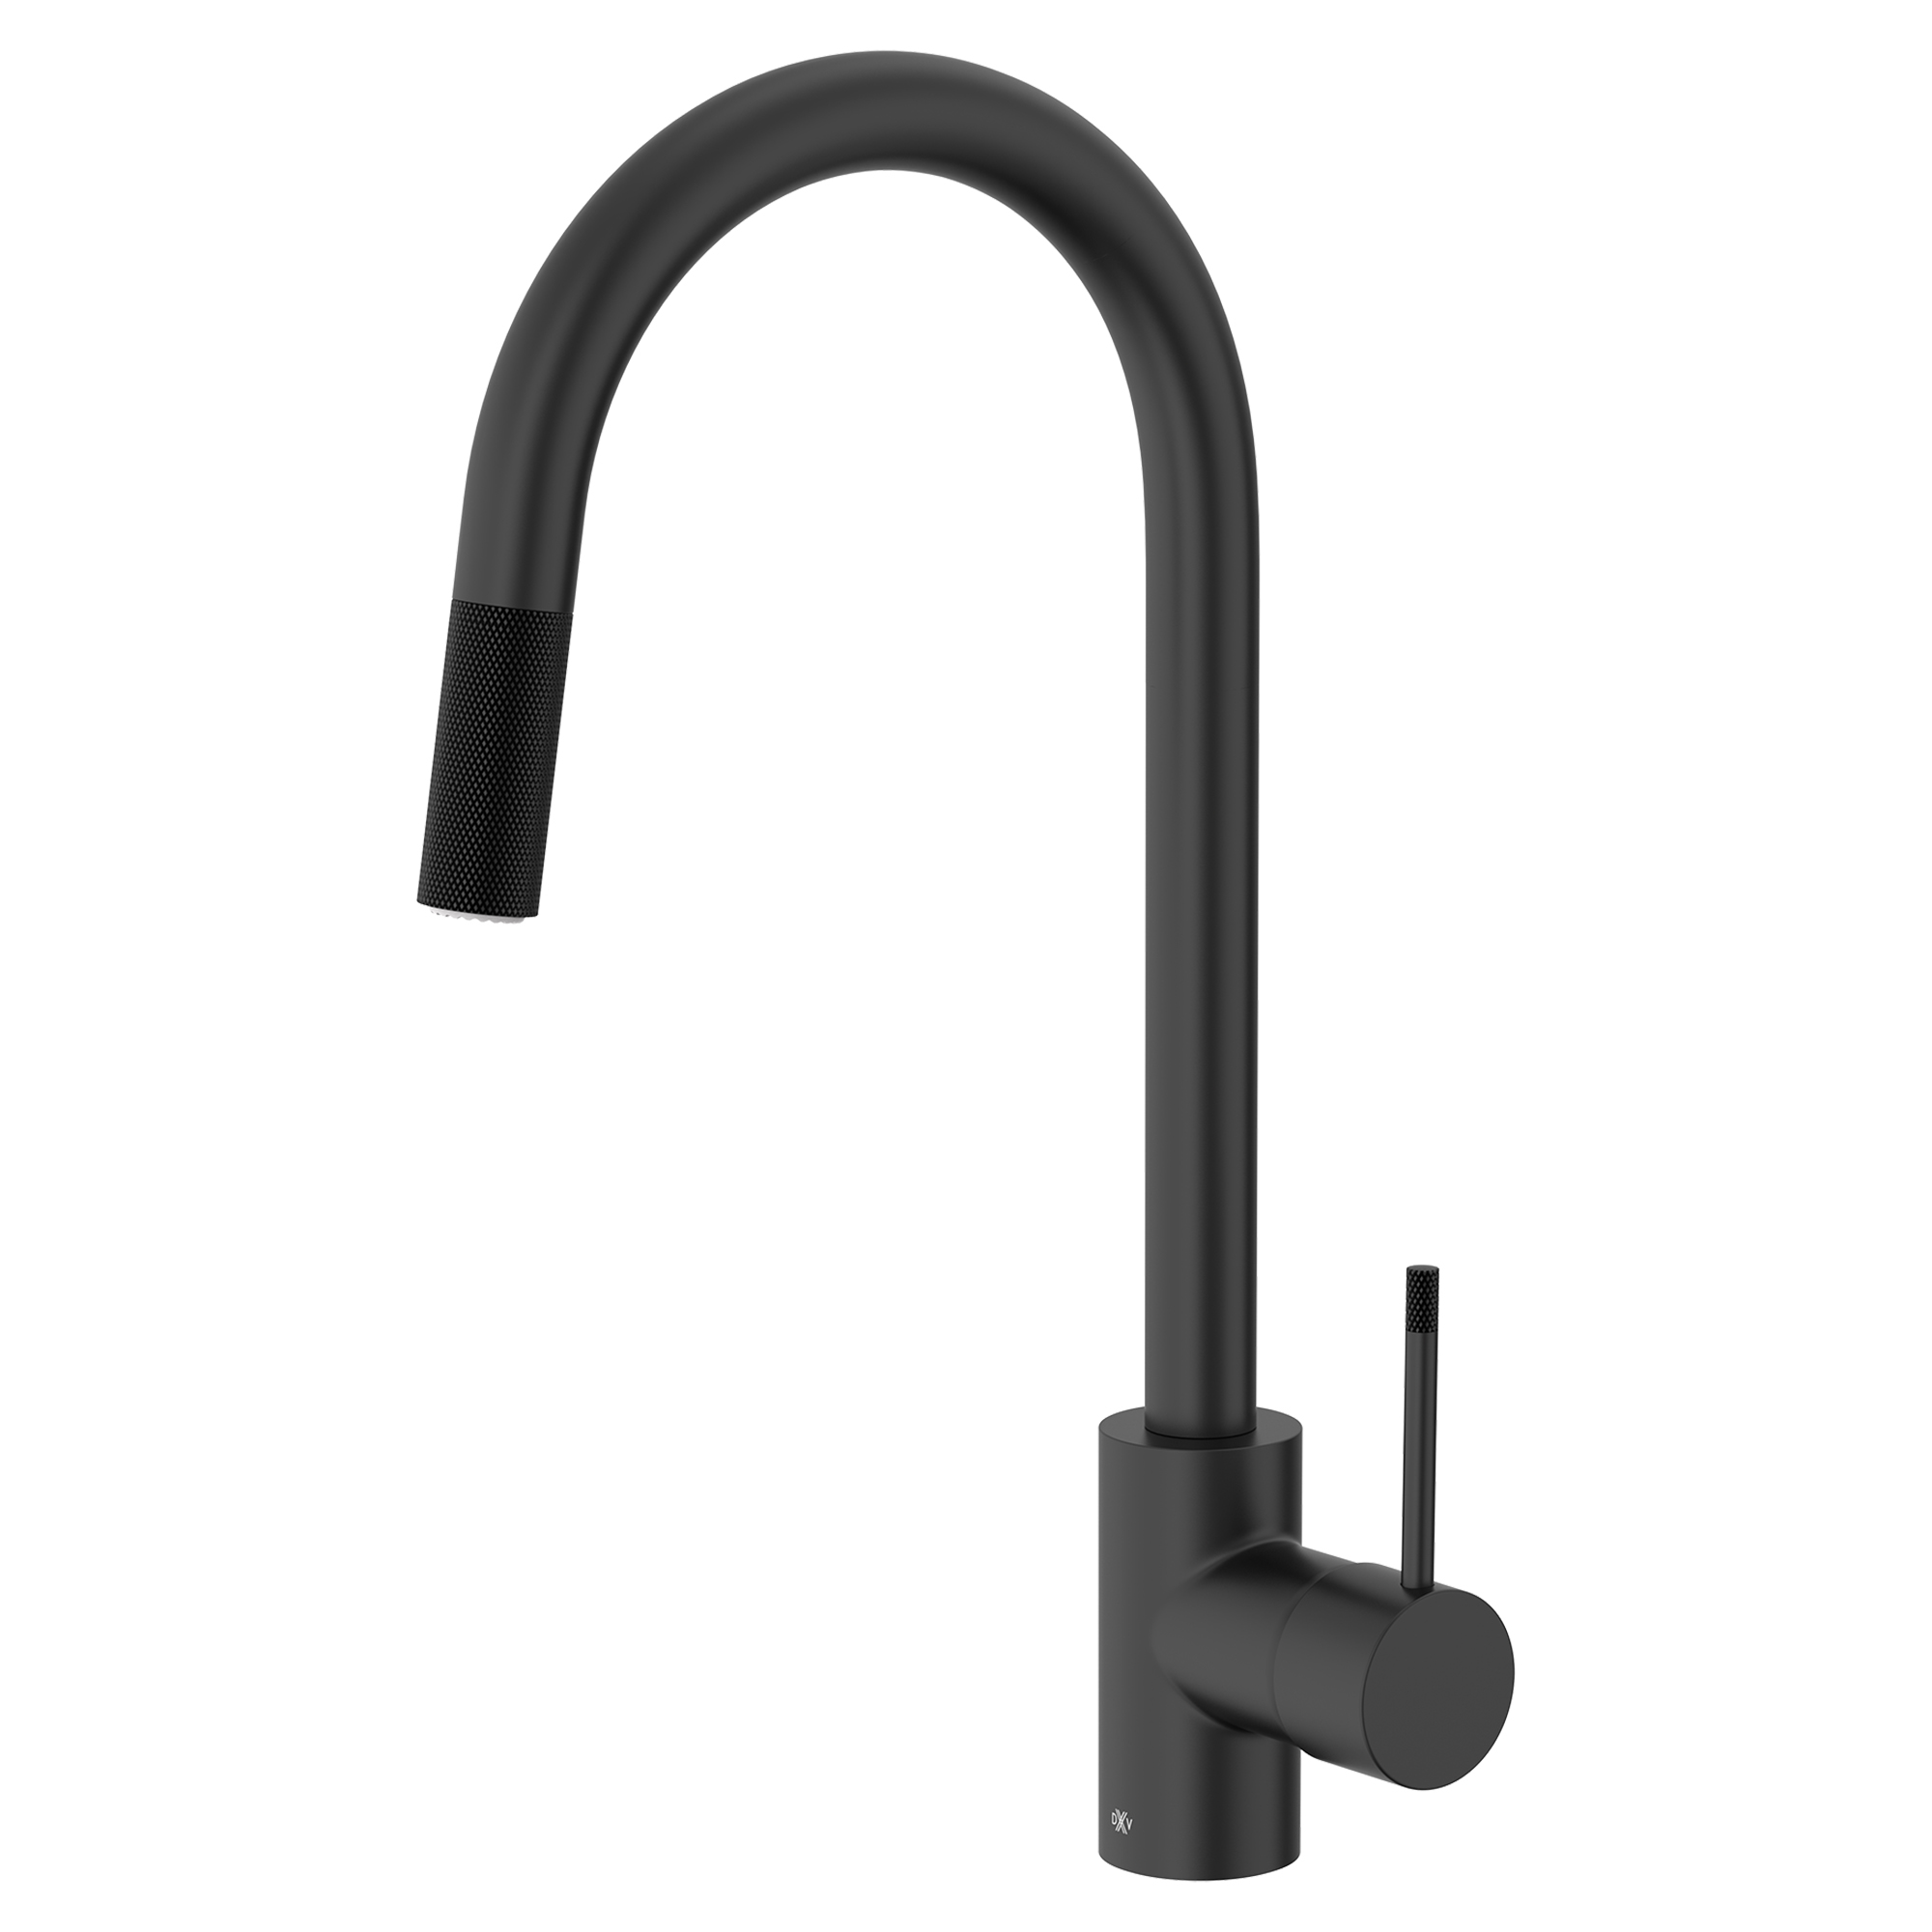 Etre Single Handle Pull-Down Kitchen Faucet with Lever Handle